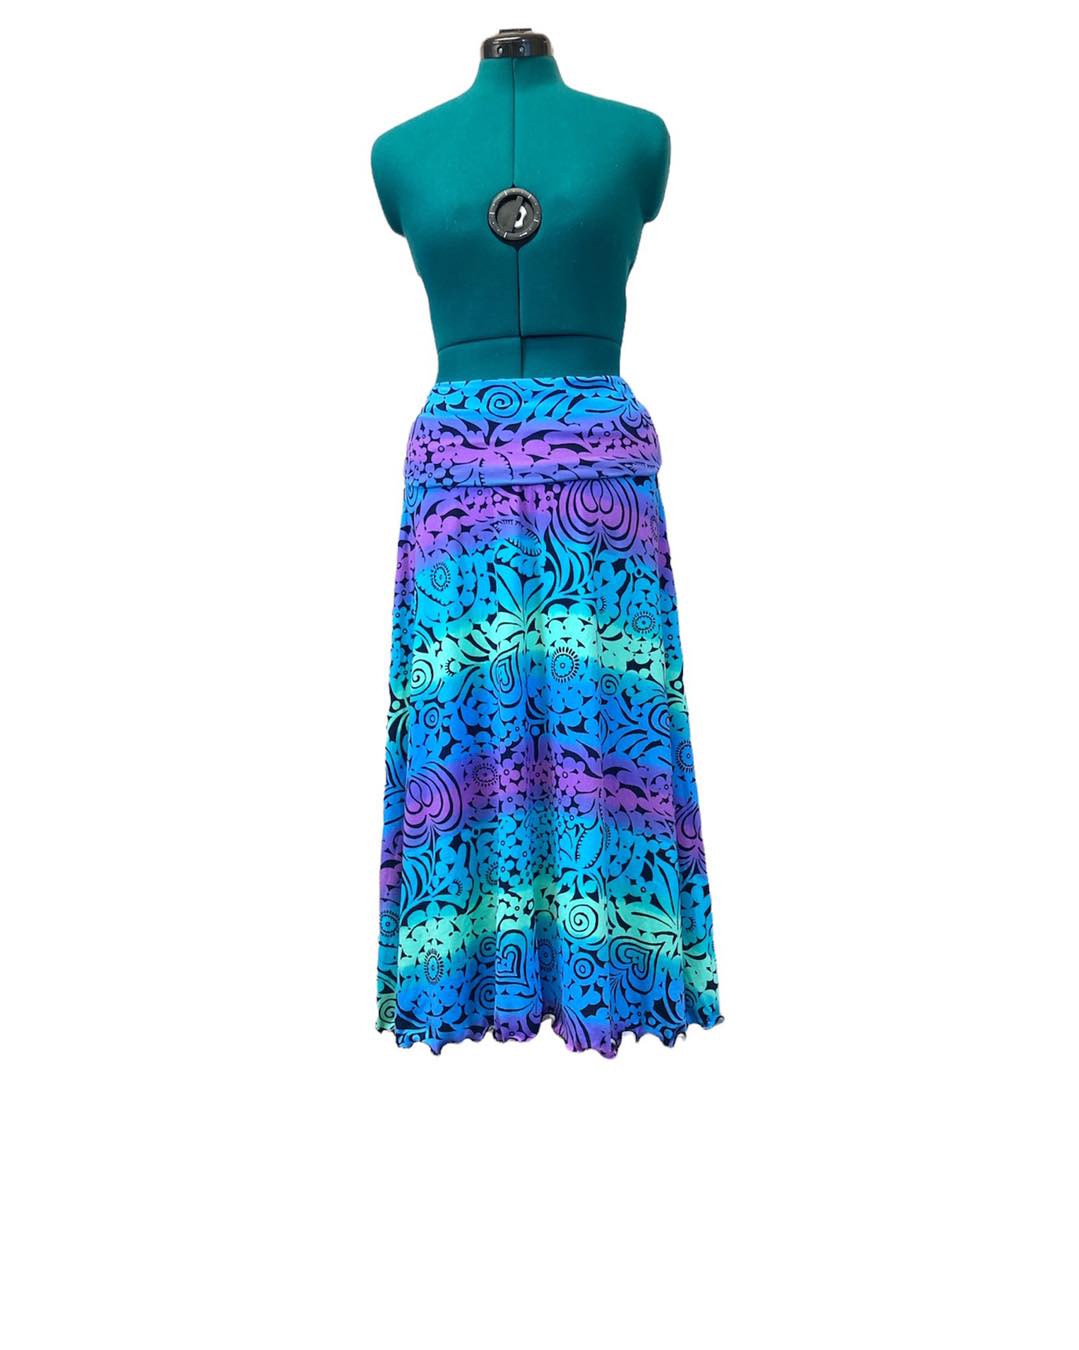 Midi Convertible Dress in Ombre Tropical DBP